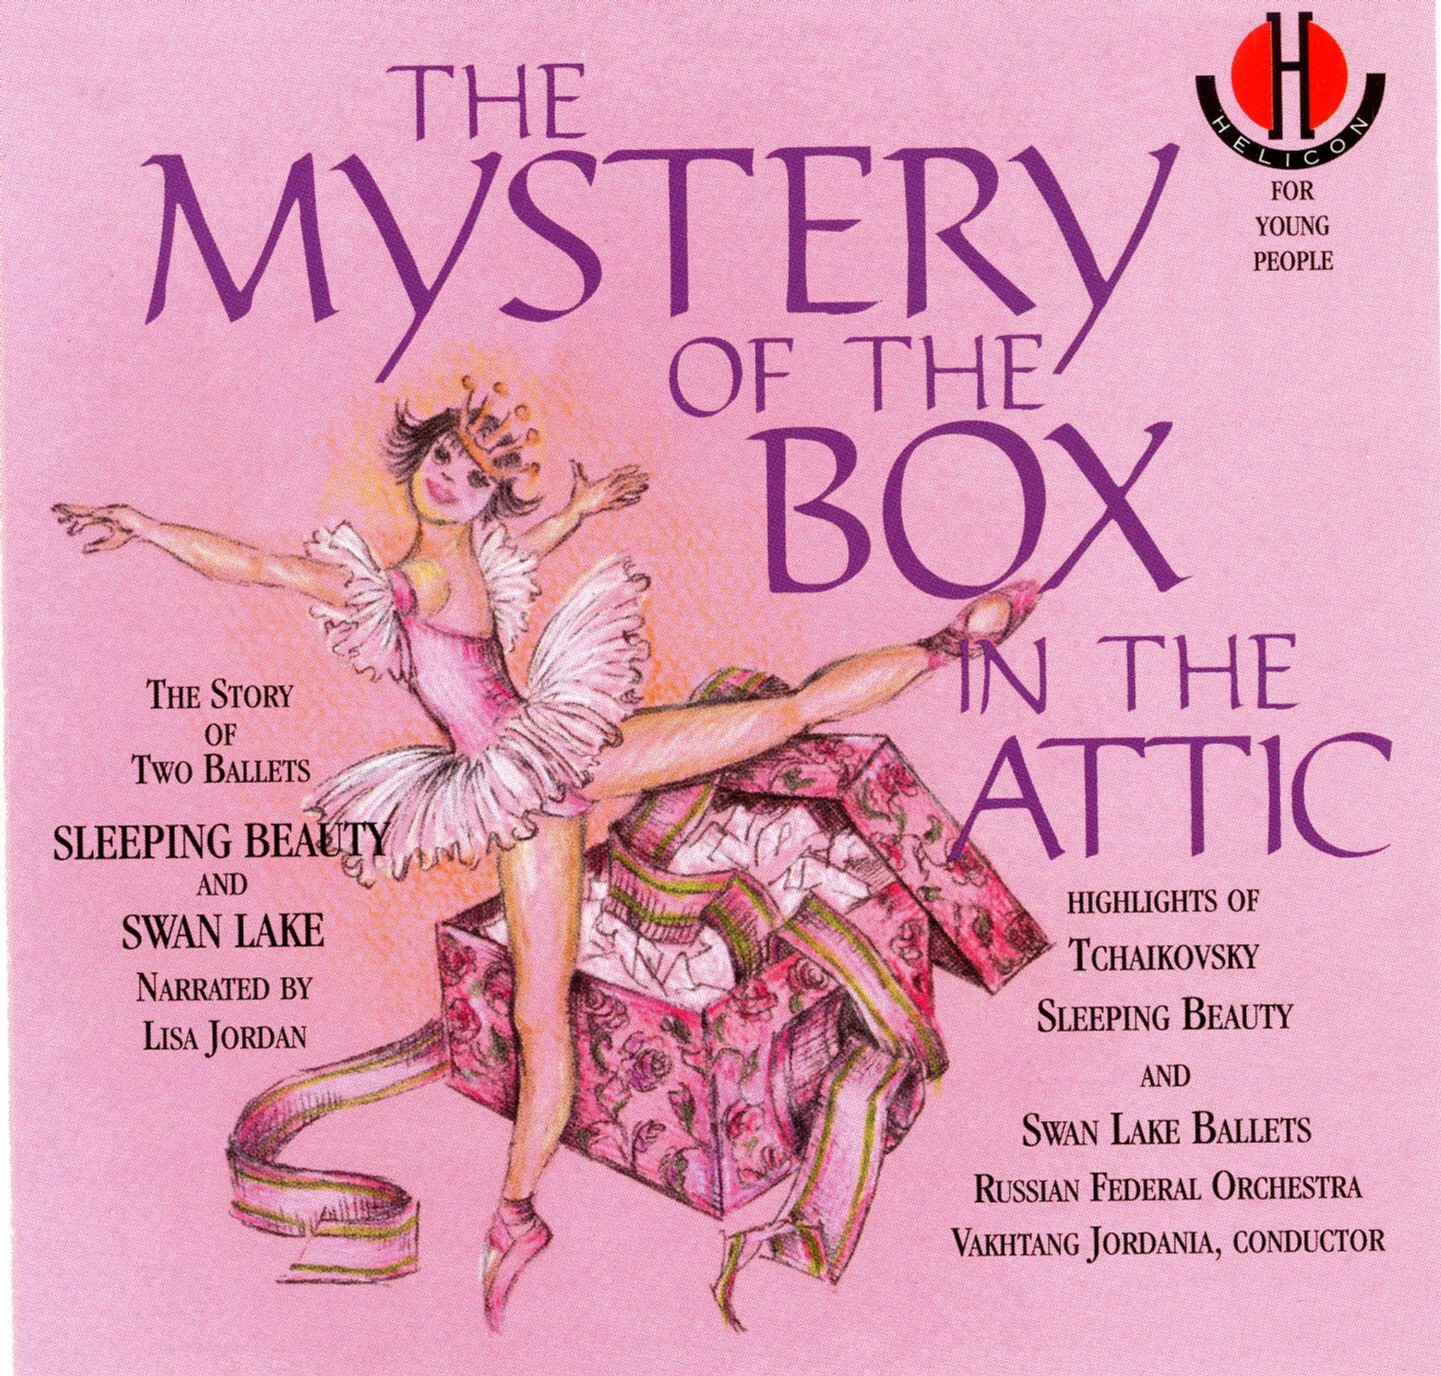 The Mystery of the Box in the Attic